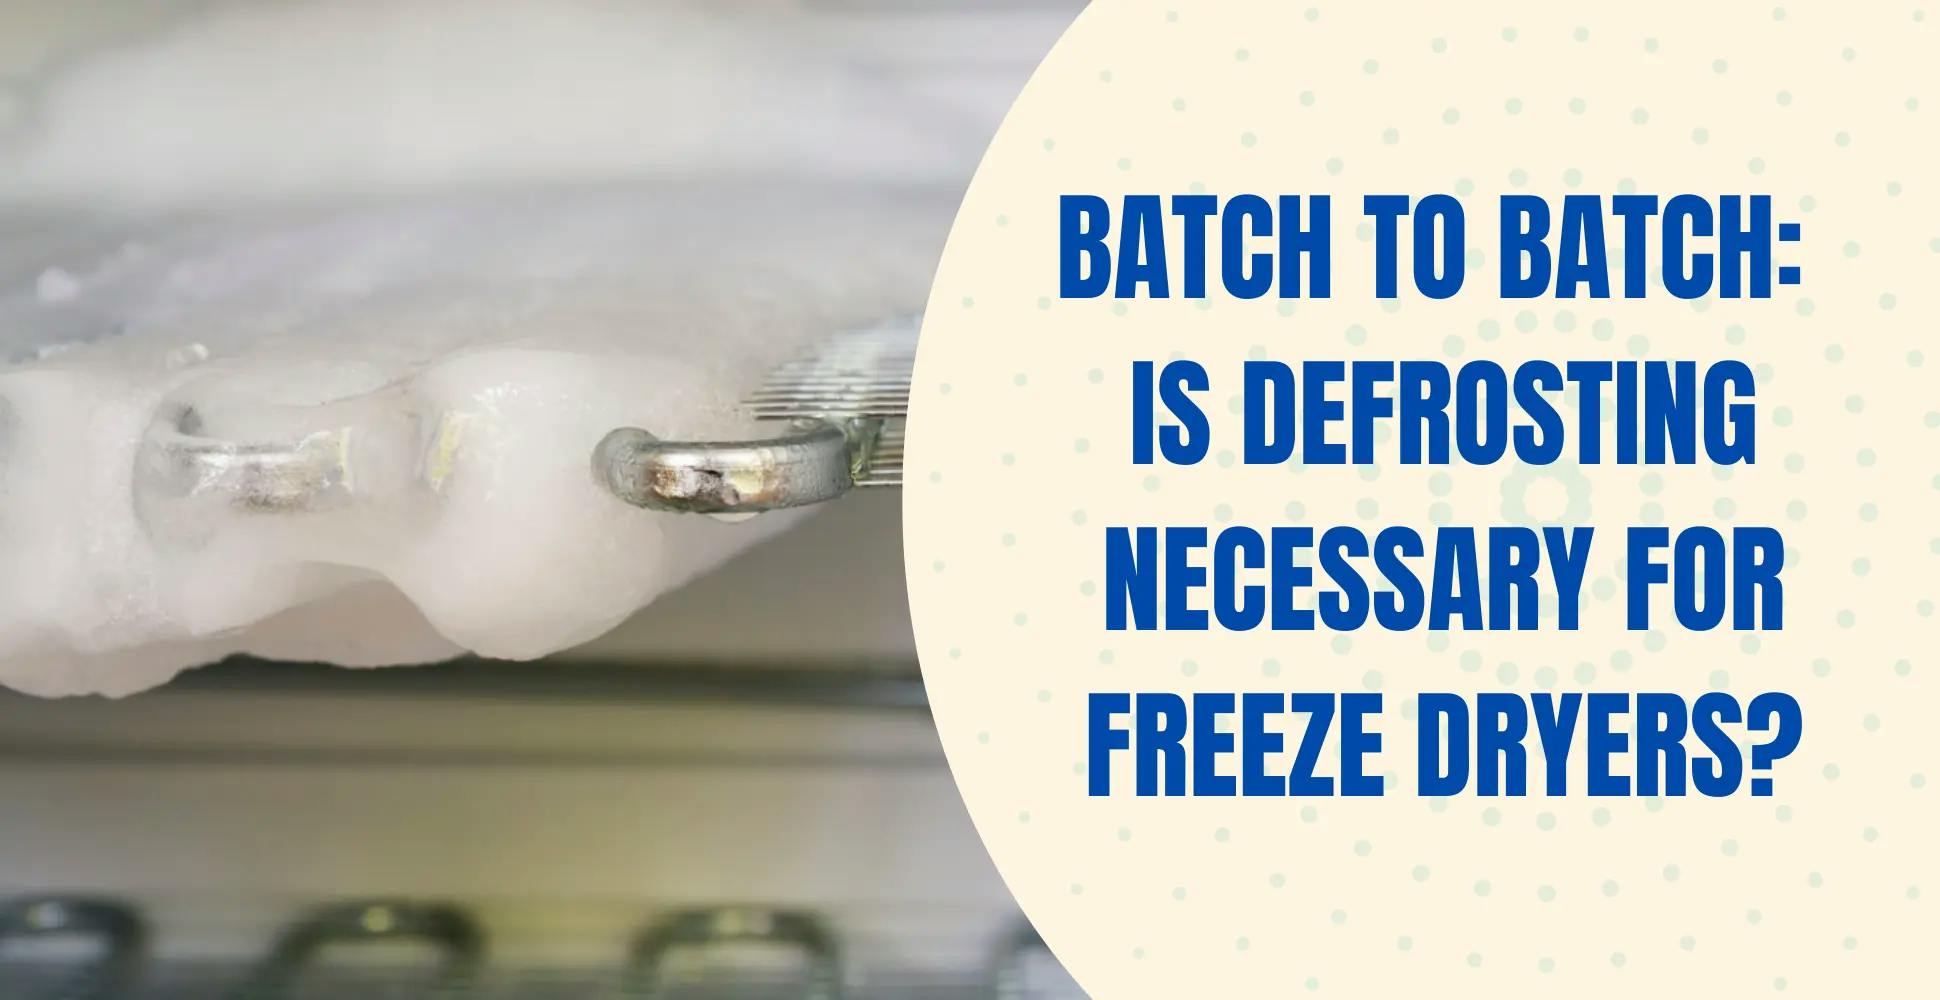 Do You Have To Defrost Freeze Dryer Between Batches